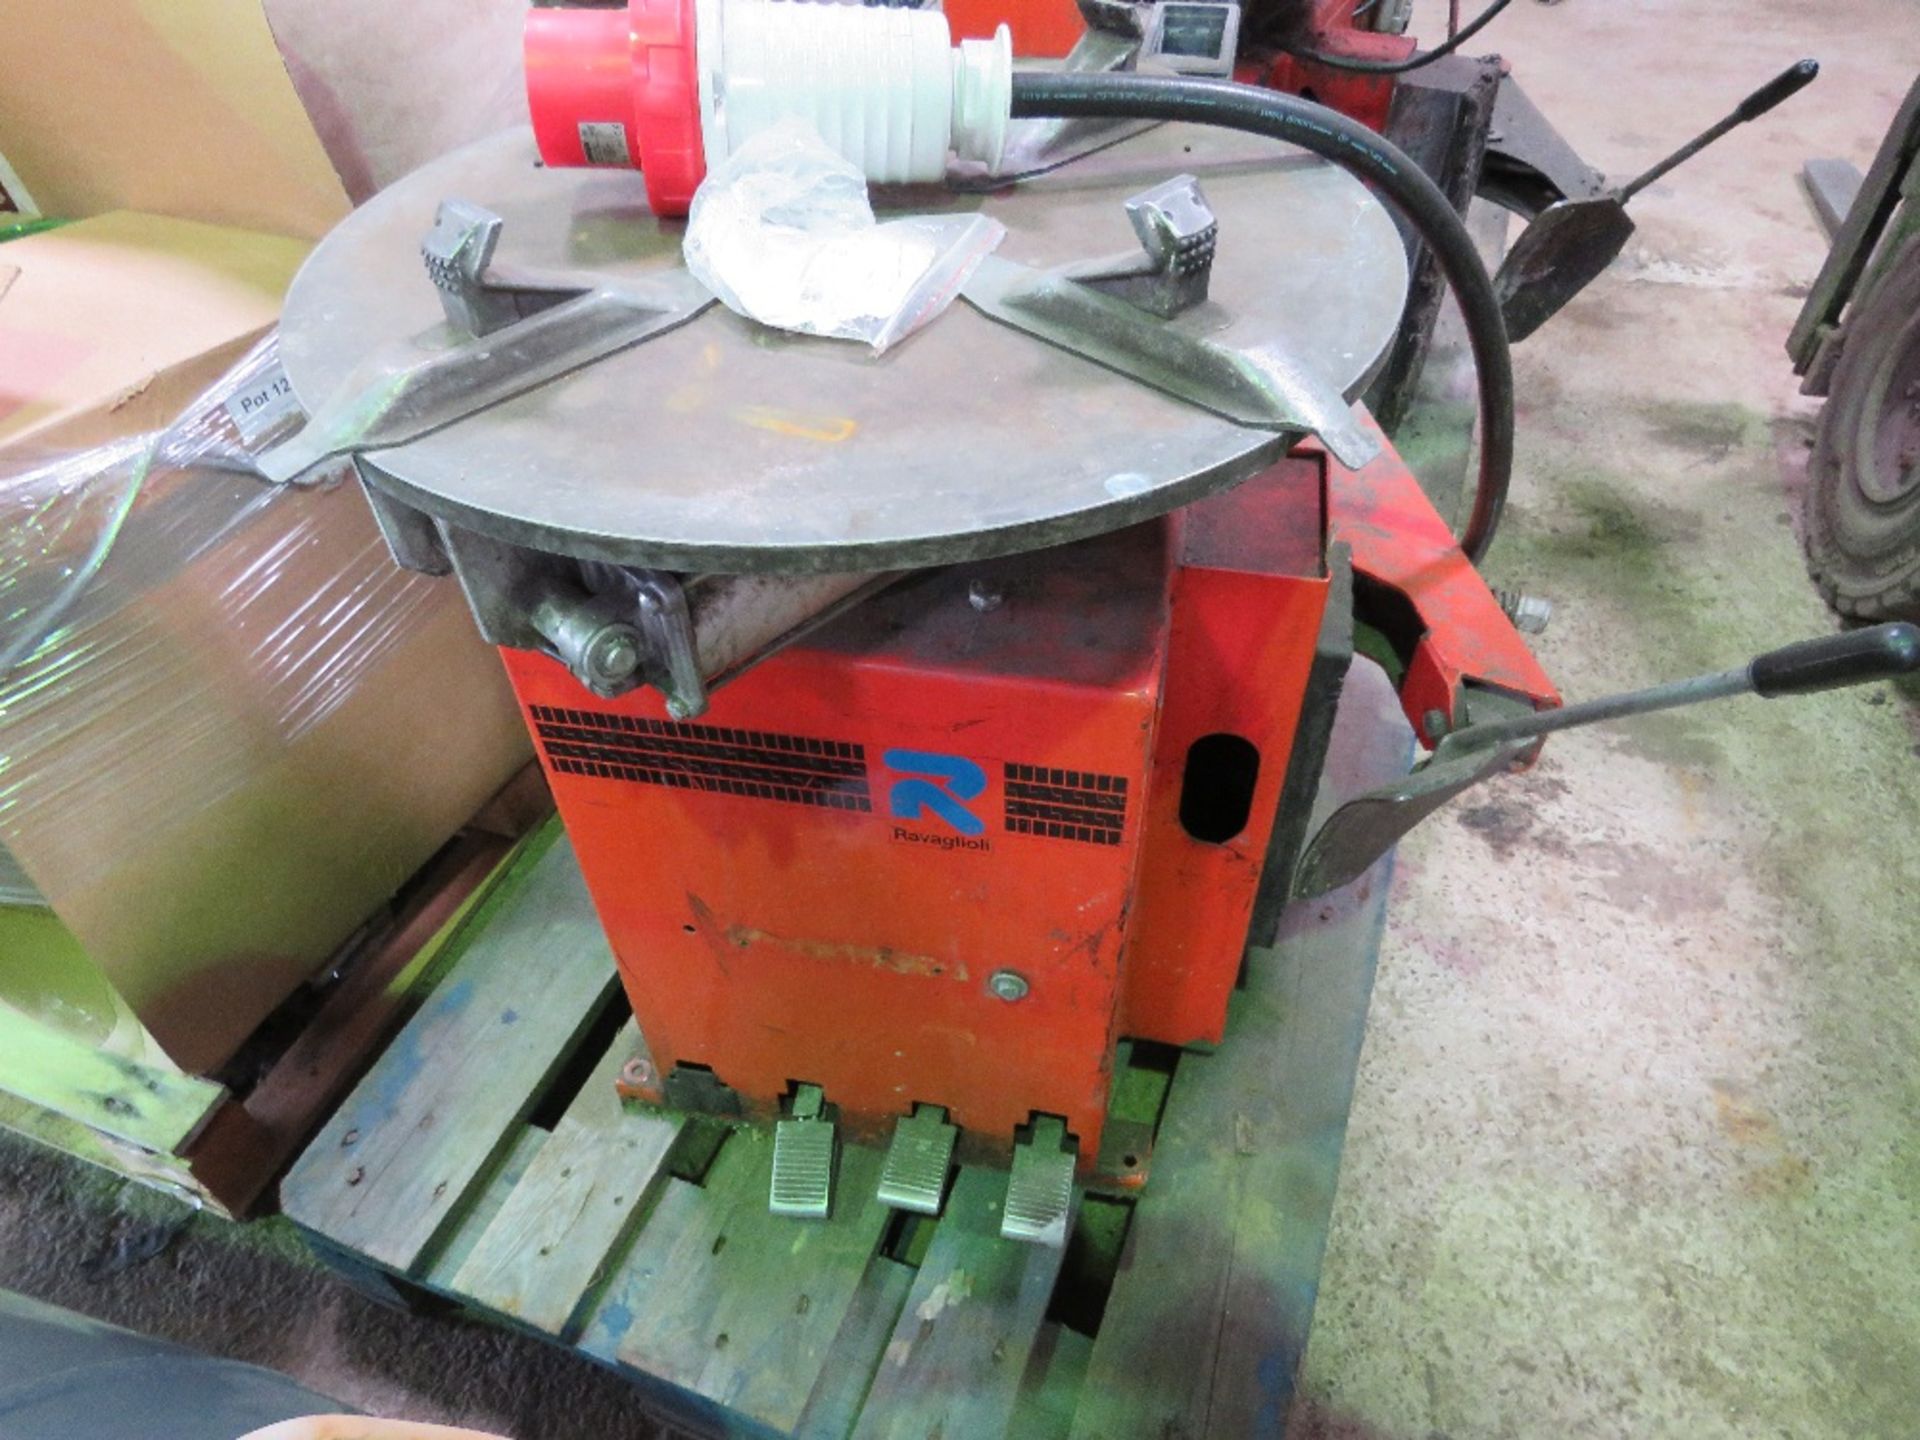 RAVAGLIOLI G82 3PHASE POWERED TYRE MACHINE. EX COLLEGE, WAS WORKING UP UNTIL 2 WEEKS AGO WHEN REMOVE - Image 2 of 4